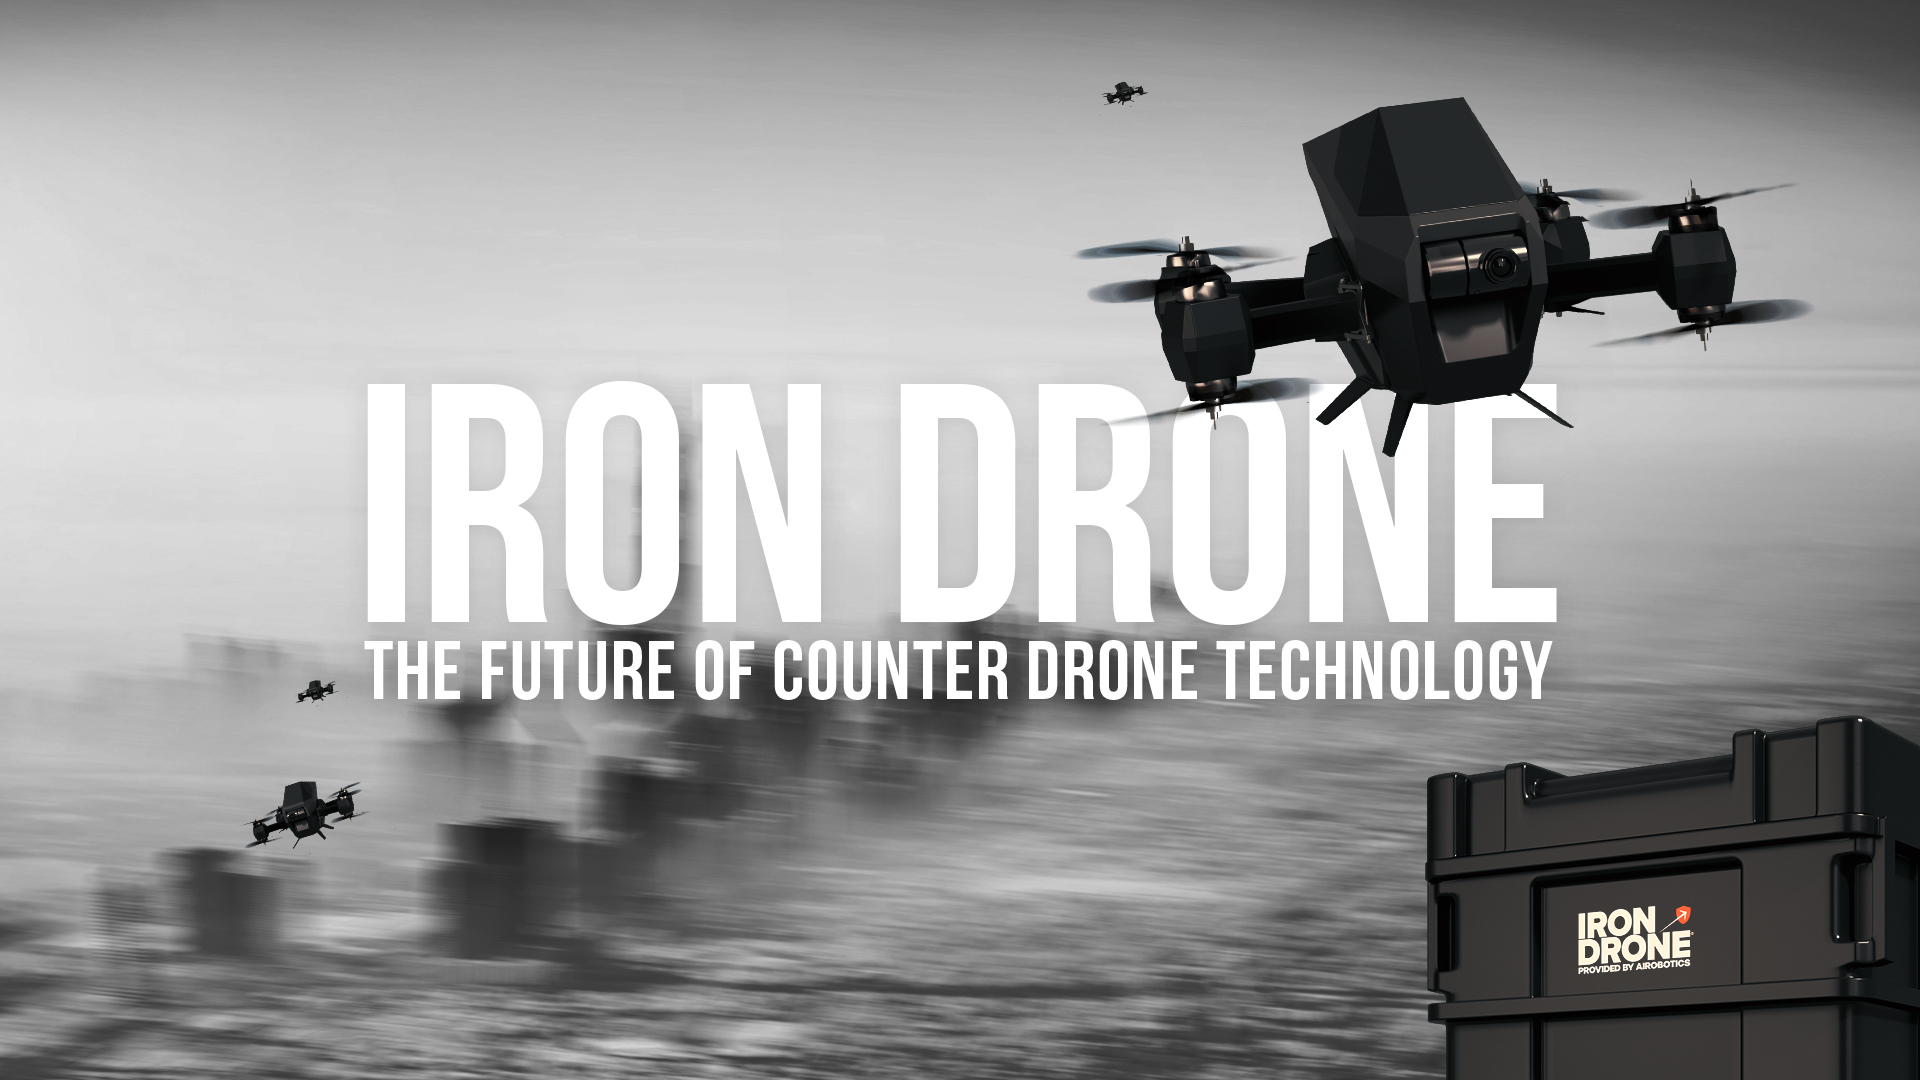 Airobotics Completes Acquisition of Iron Drone Assets, Launches New Counter-Drone System